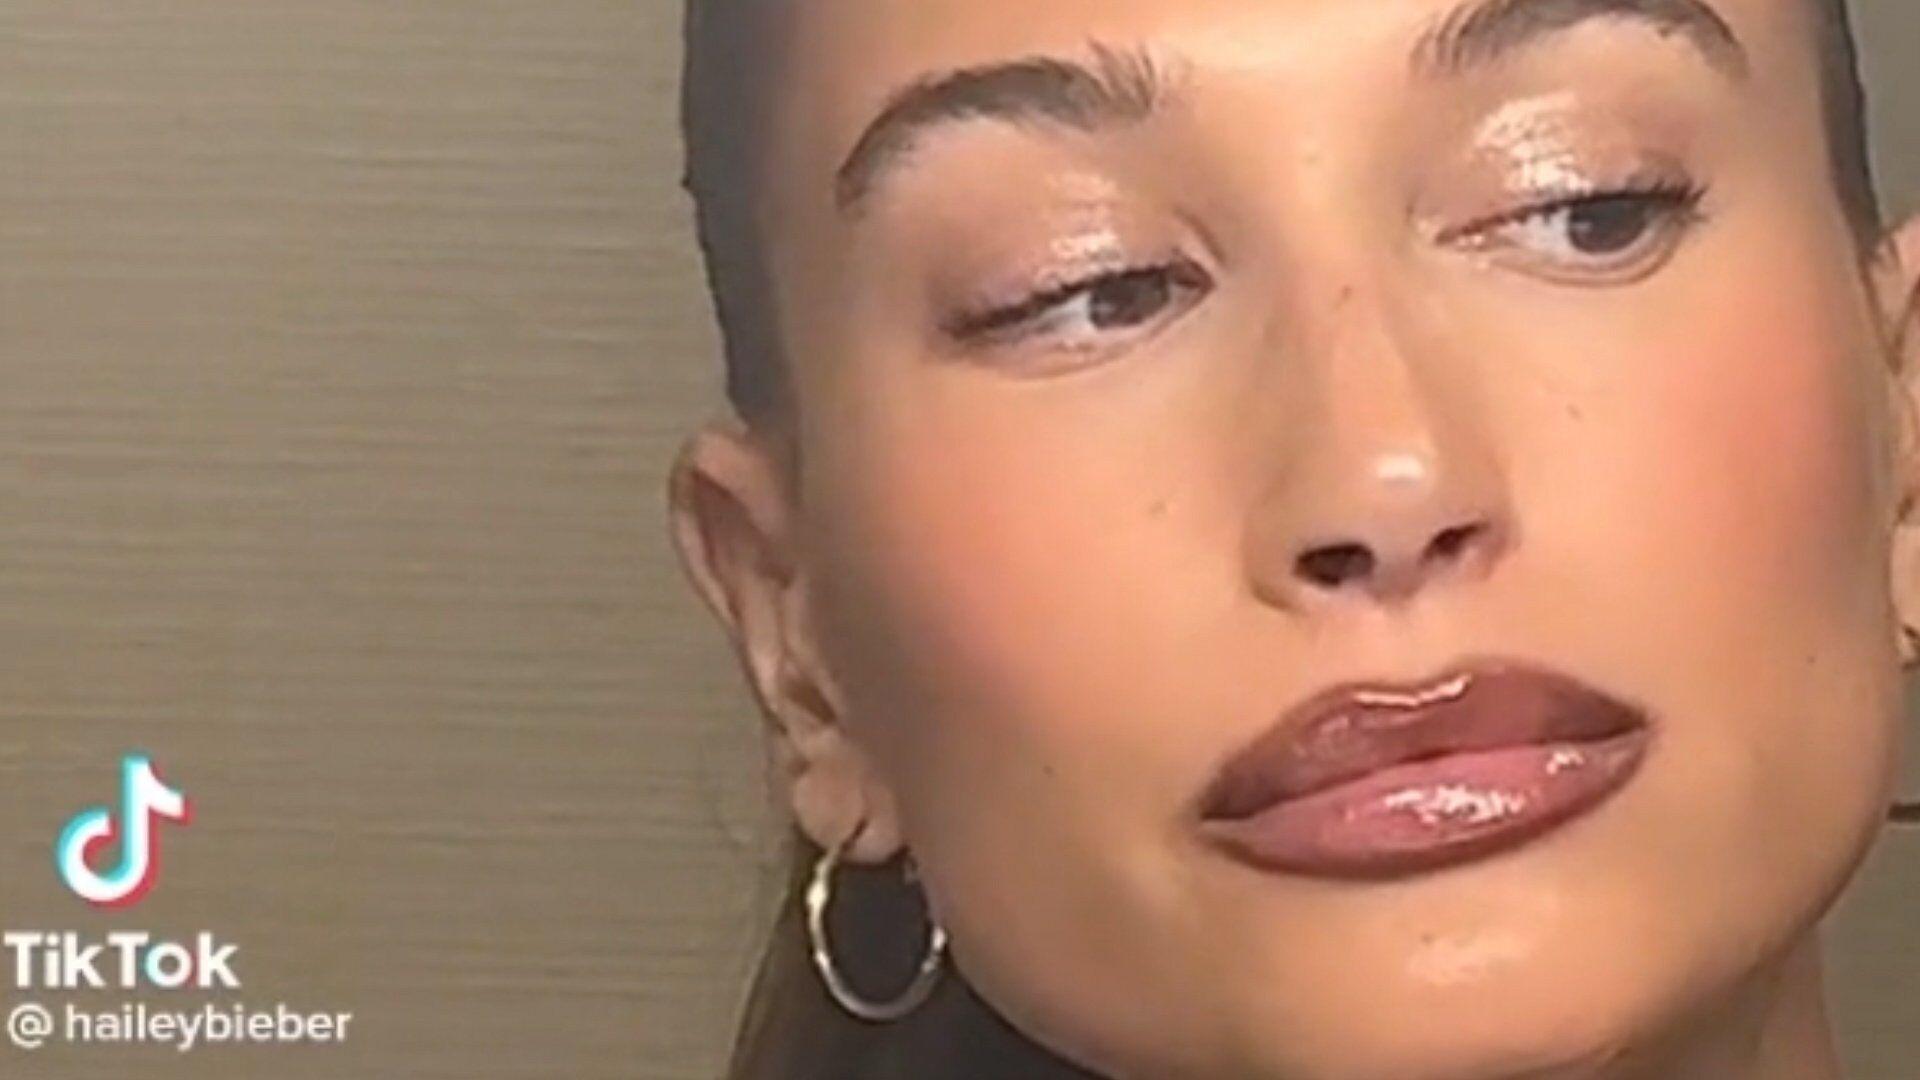 Hailey Bieber accused of cultural appropriation over 'brownie glazed lips